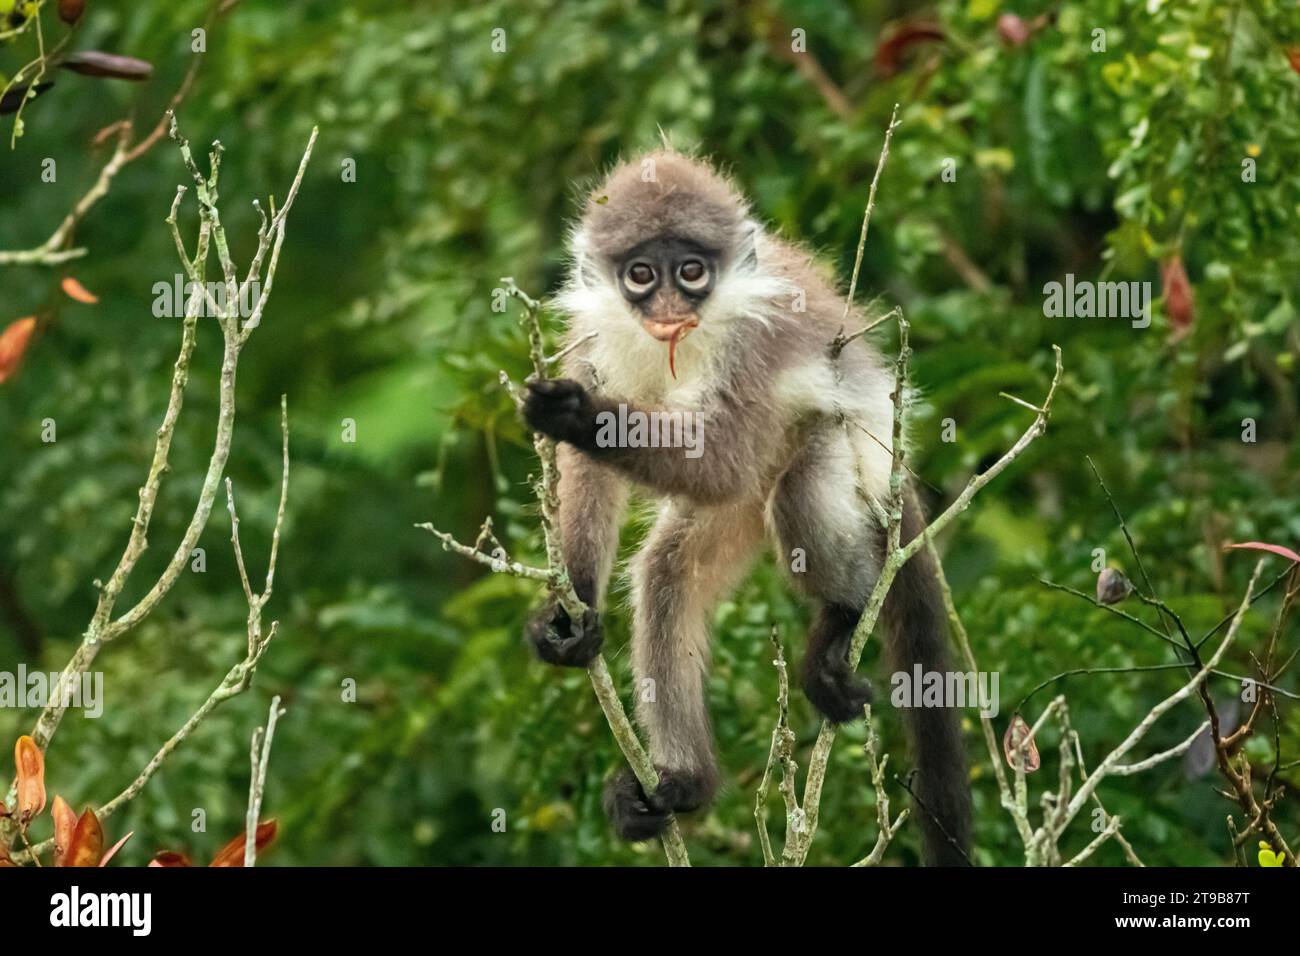 A juvenile Dusky leaf monkey or Spectacled langur (Trachypithecus obscurus) foraging on tree in Malaysia. Stock Photo